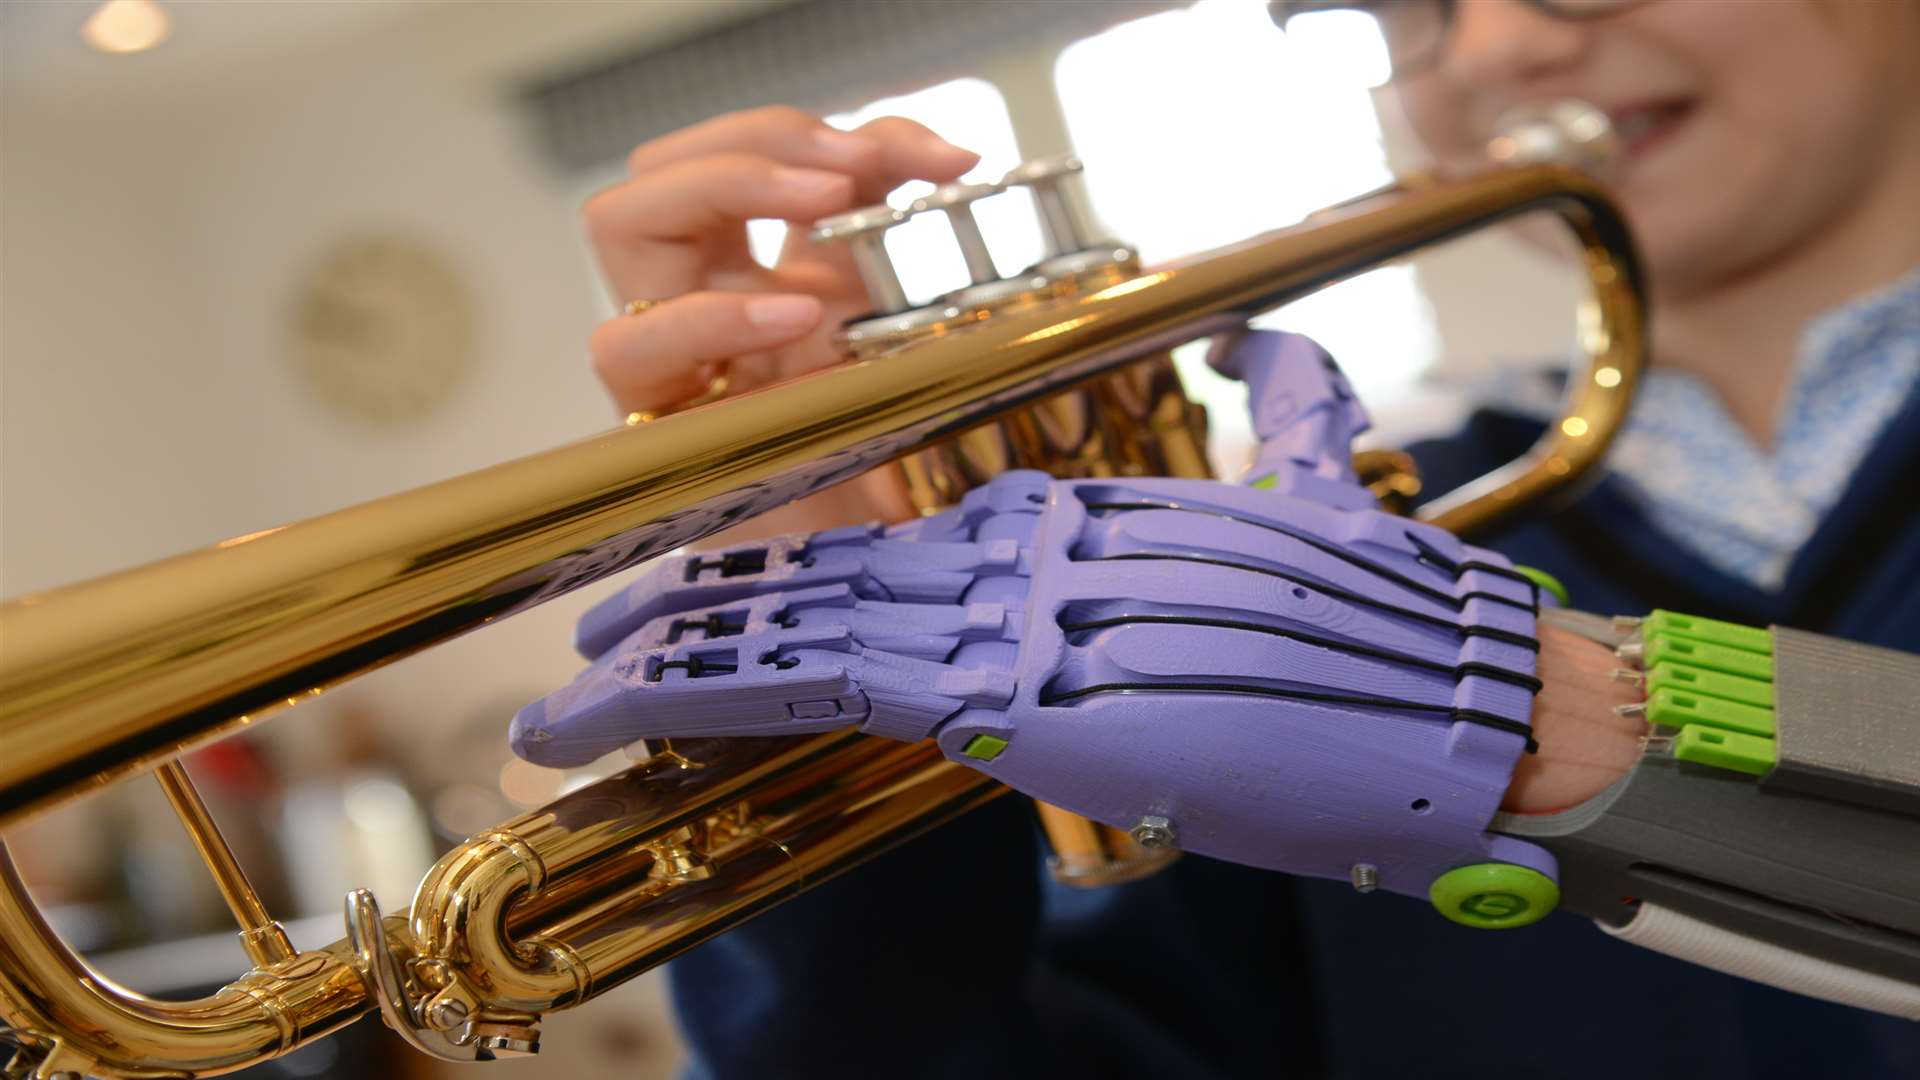 Lara can play the trumpet, piano and other instruments with her new hand. Picture: Gary Browne